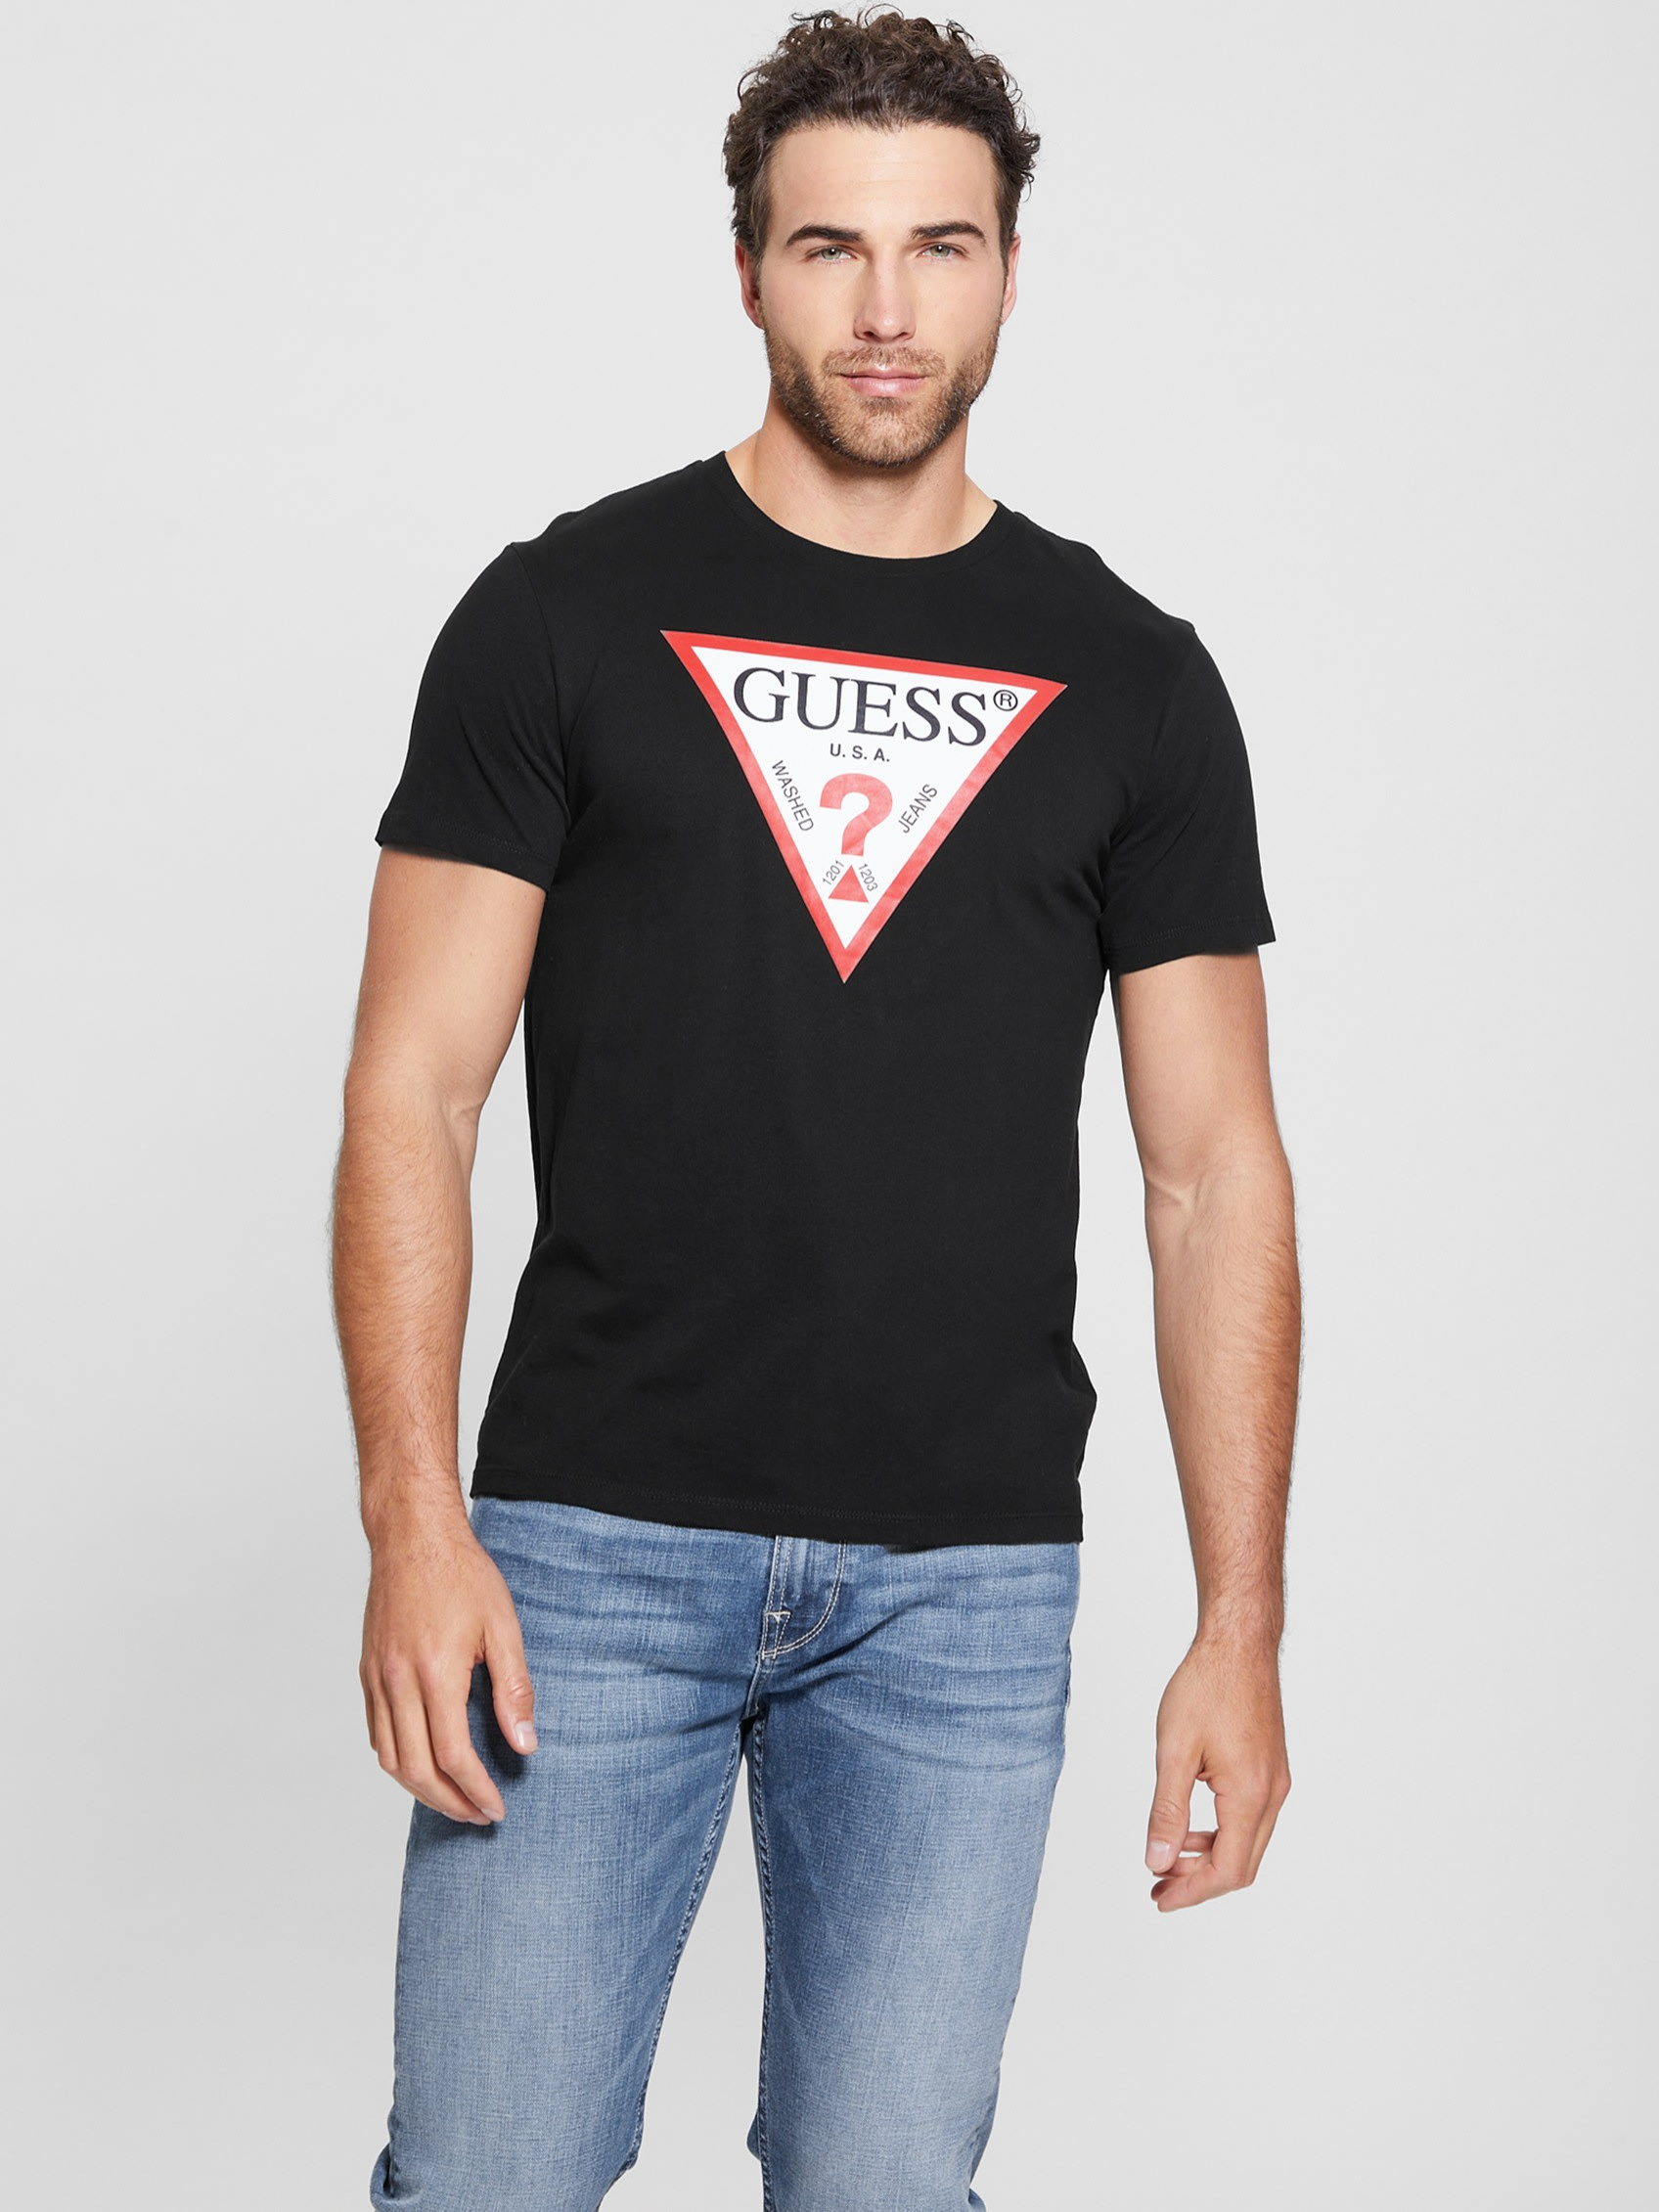 CLASSIC LOGO ICON TEE | Guess Philippines